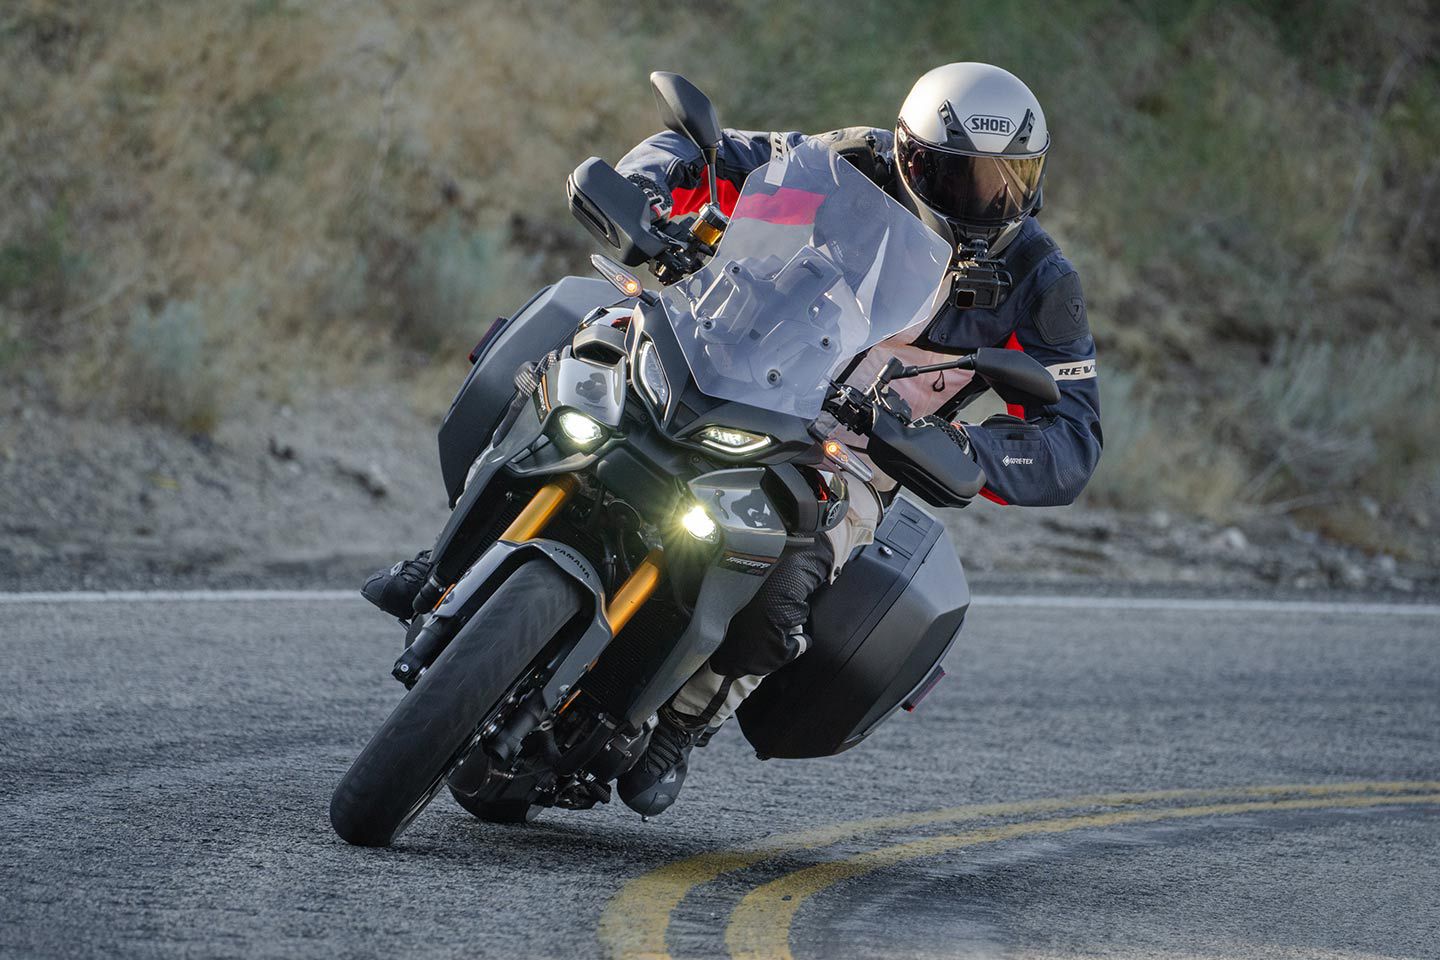 Lean-angle-sensitive cornering head beams return on the 2024 Yamaha Tracer 9 GT+, however the function isn’t the best compared to other bikes equipped with this technology.